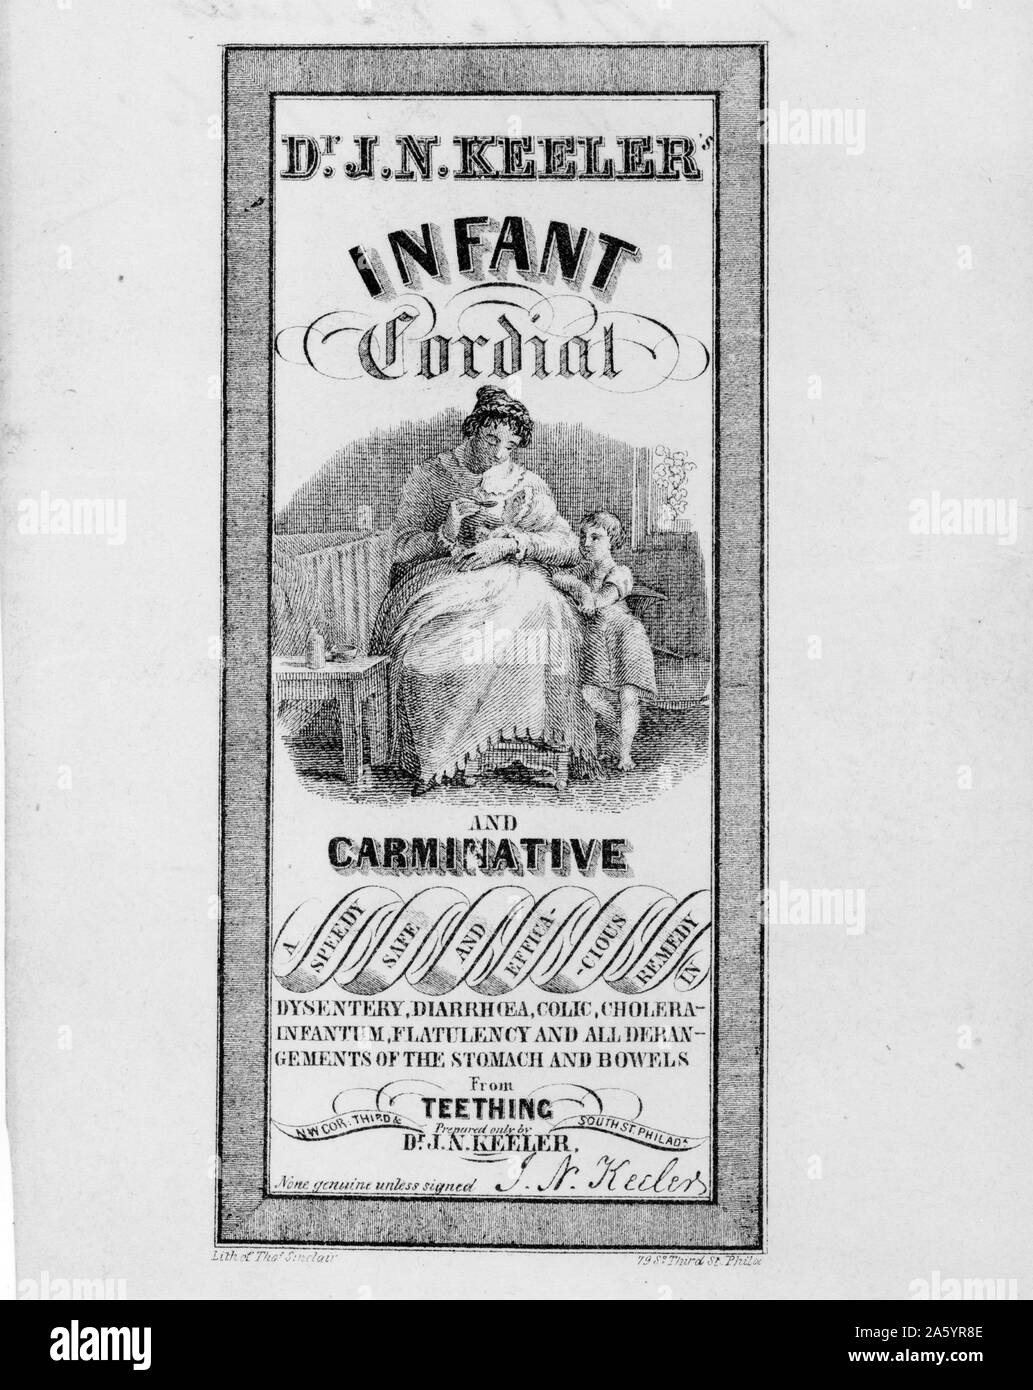 Patent medicine label of Dr. J.N. Keeler's infant cordial and carminative medicine showing a woman giving the medicine to her baby. Dated 1846 Stock Photo